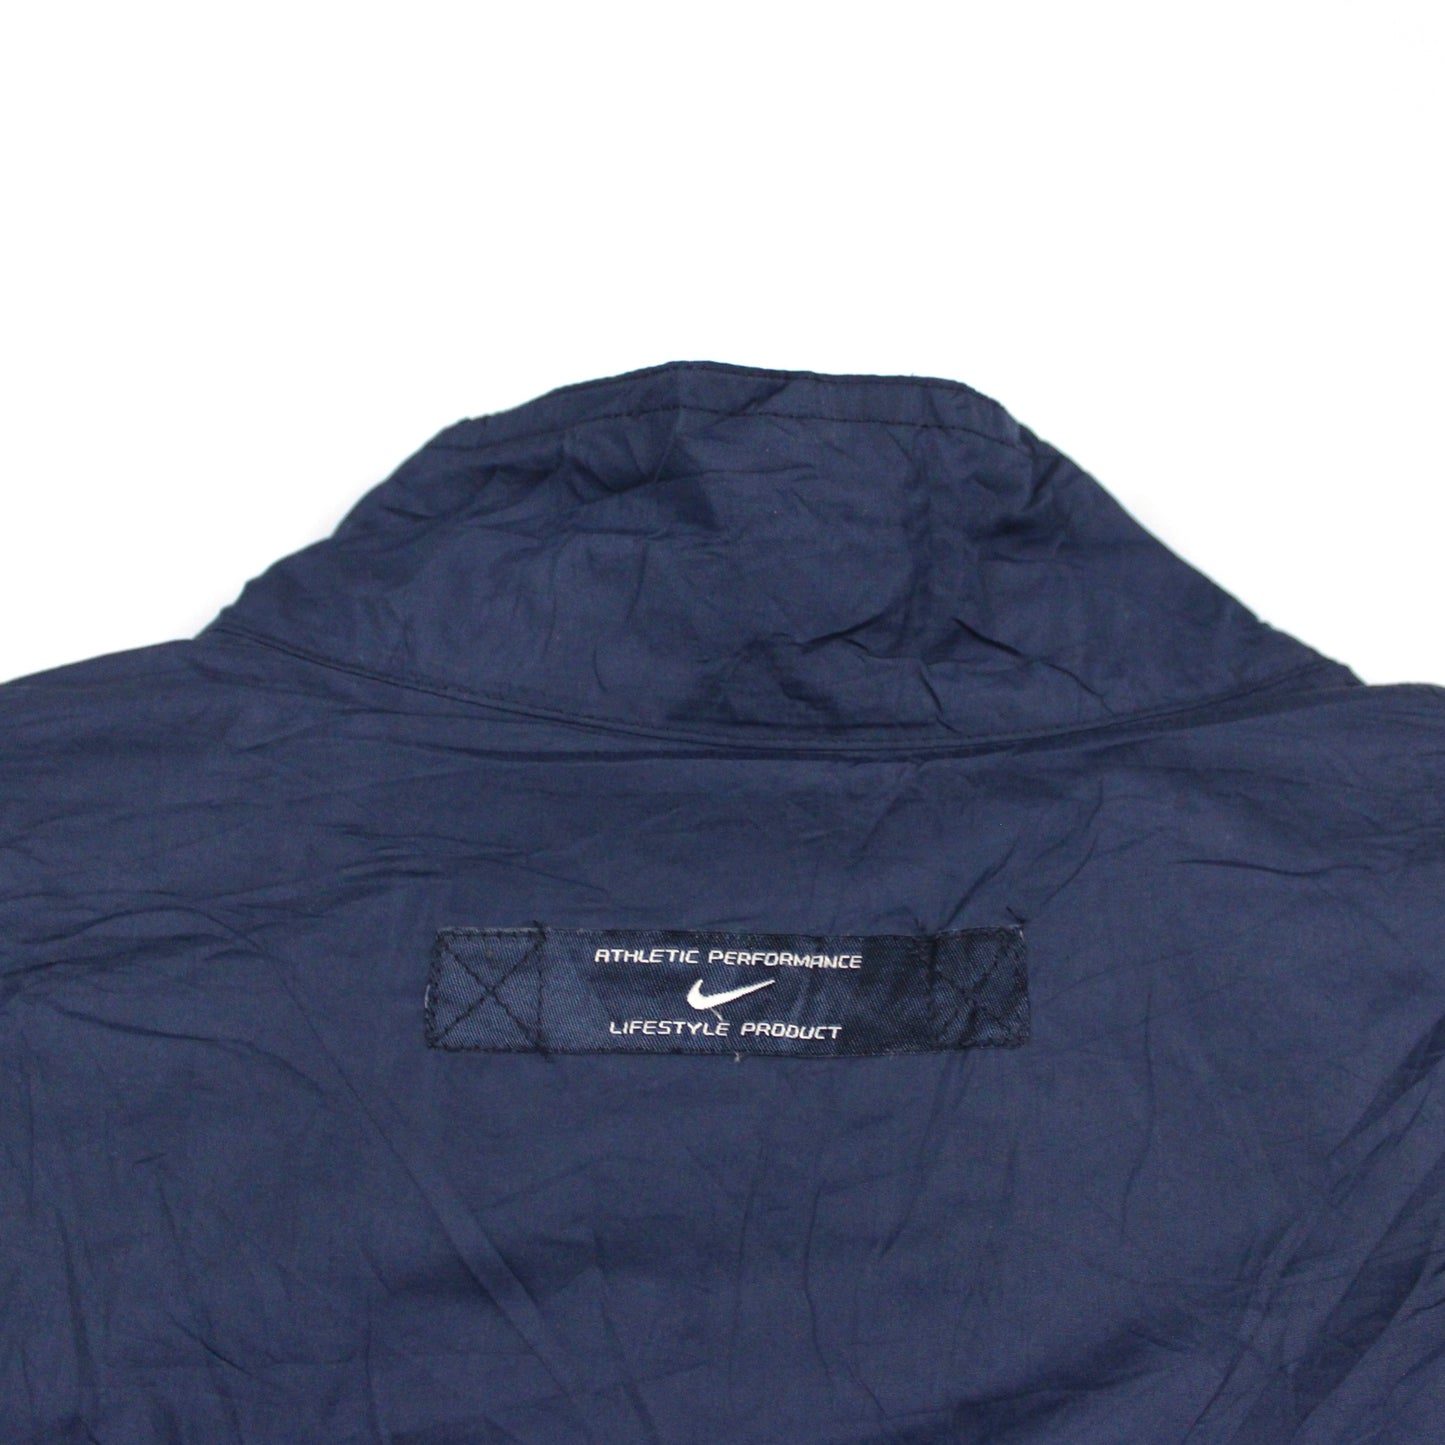 Nike Navy Shell Jacket, Grey Cotton Lining, 2000s tag (L)